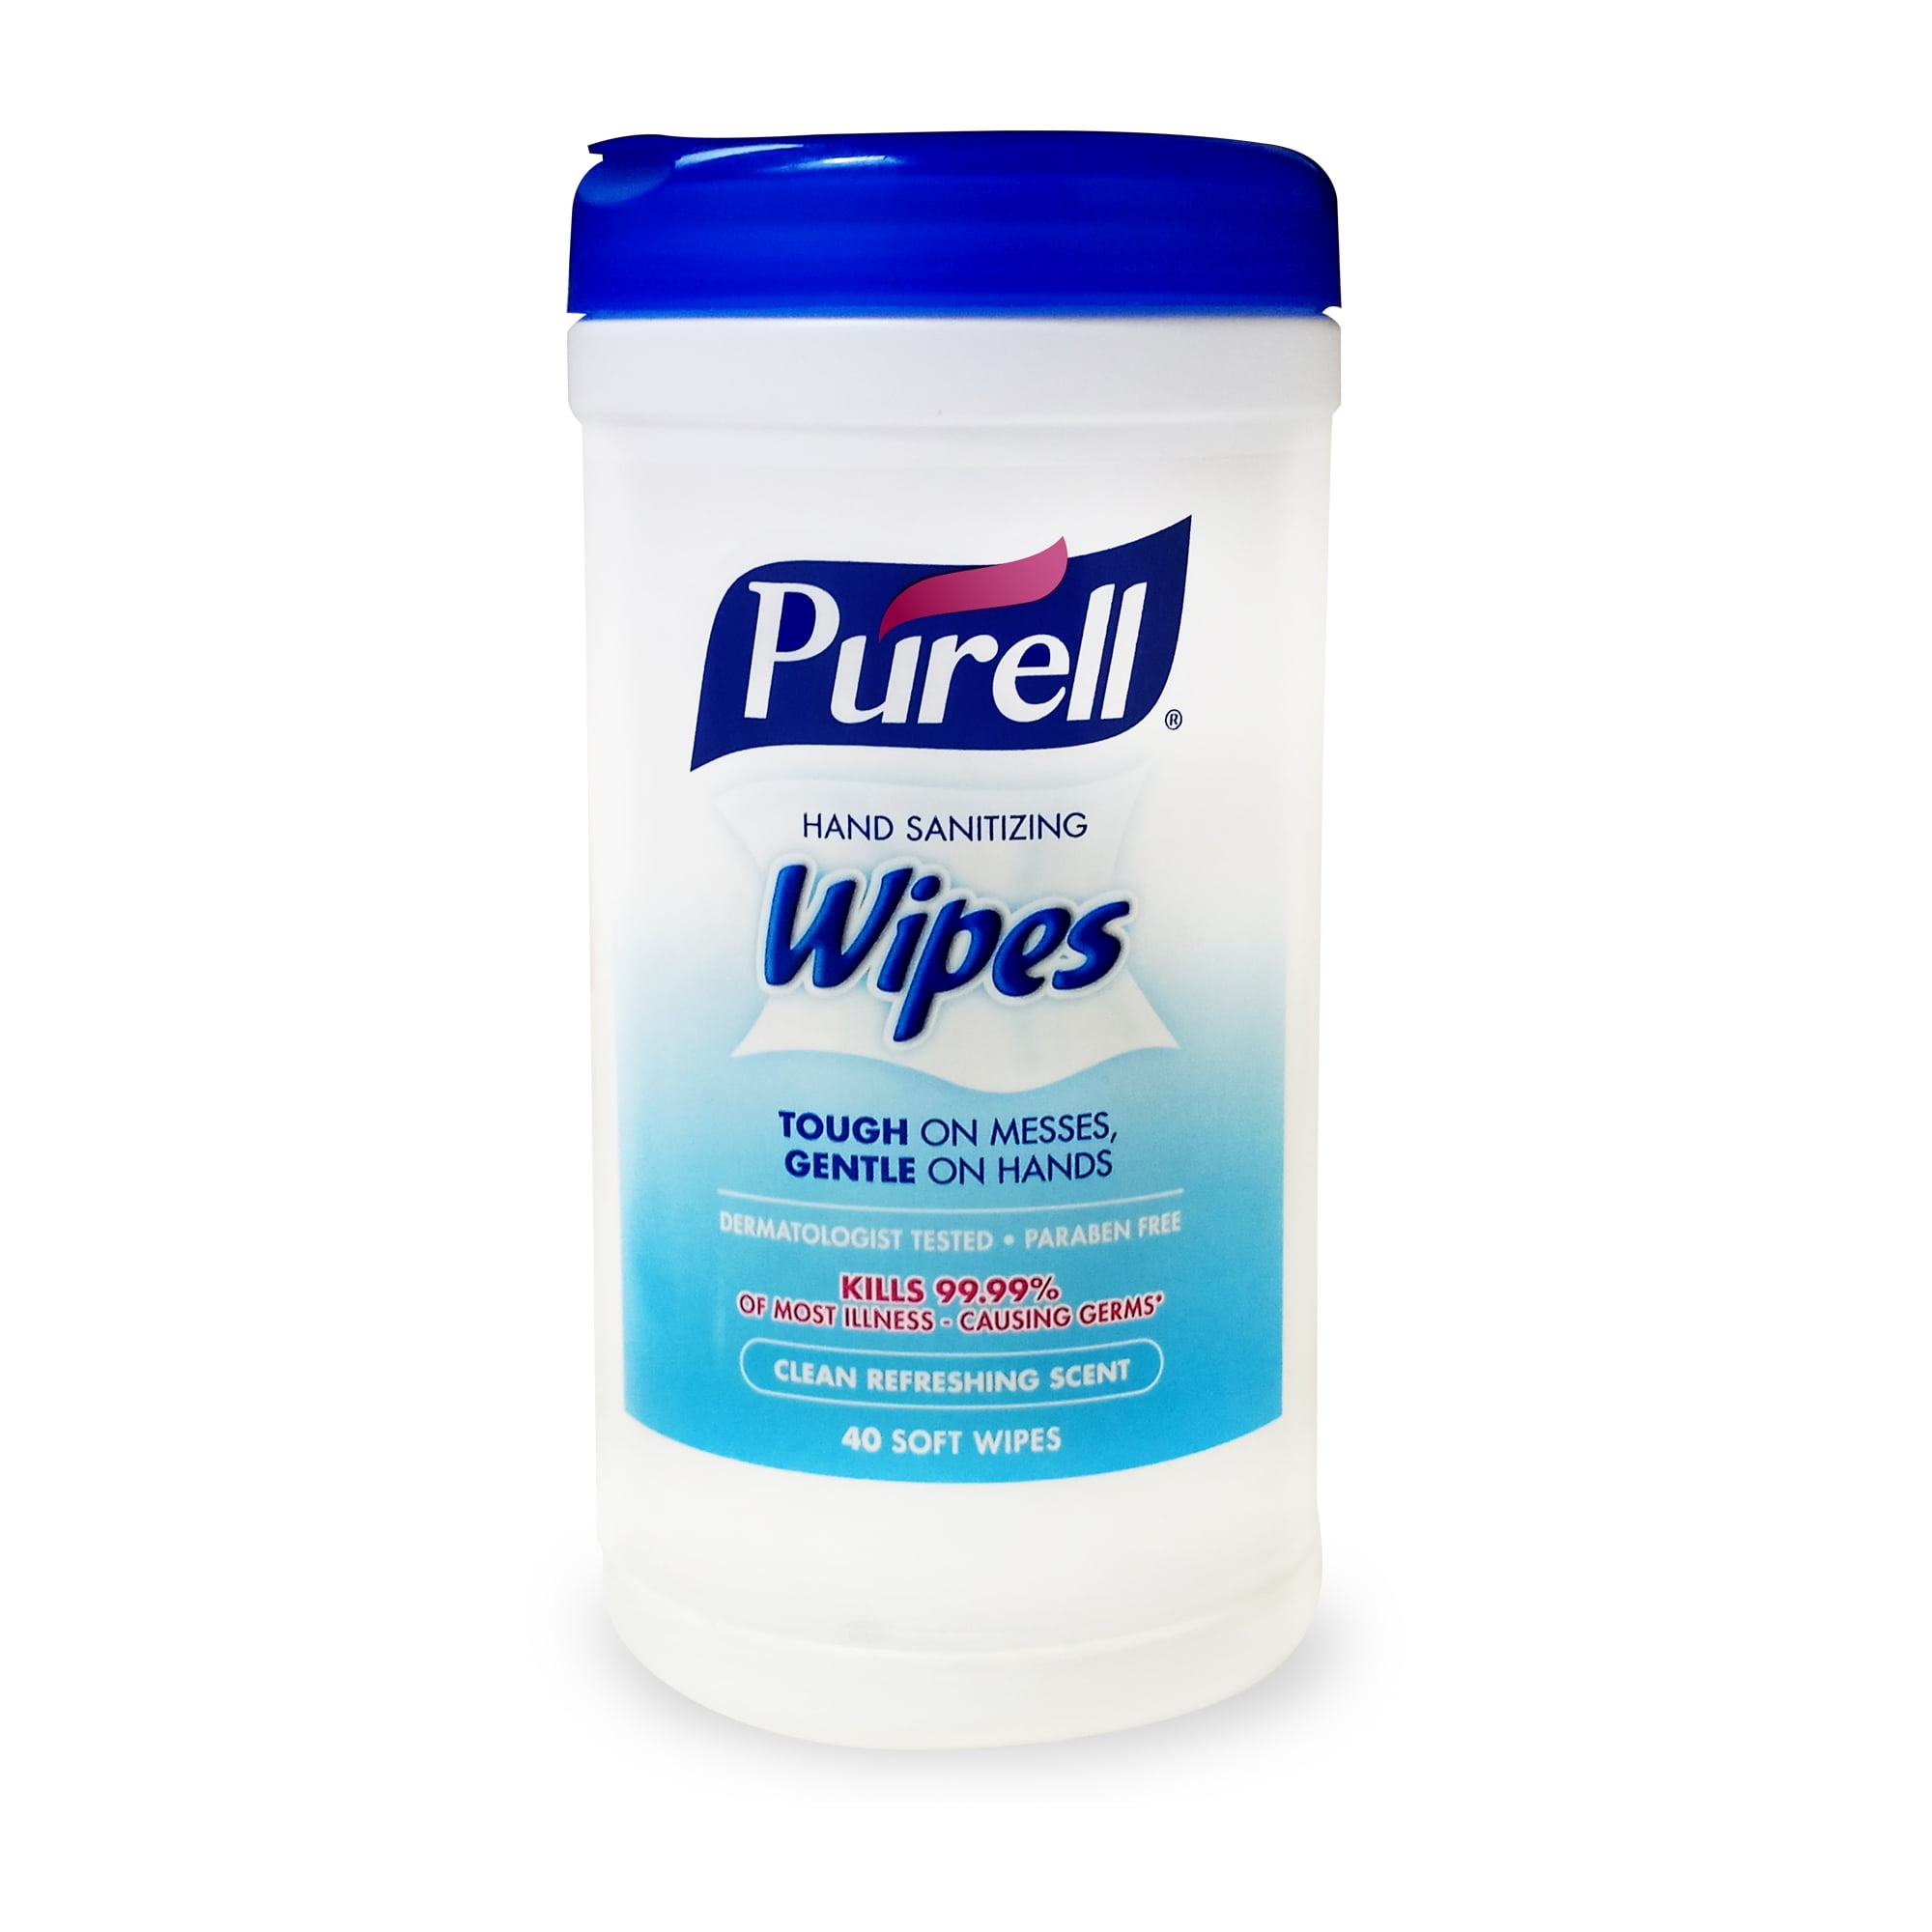 Sanitizing wipes. . Hand Sanitizer wipes. Sanitizing strength Quiclean. Hand Refresher.